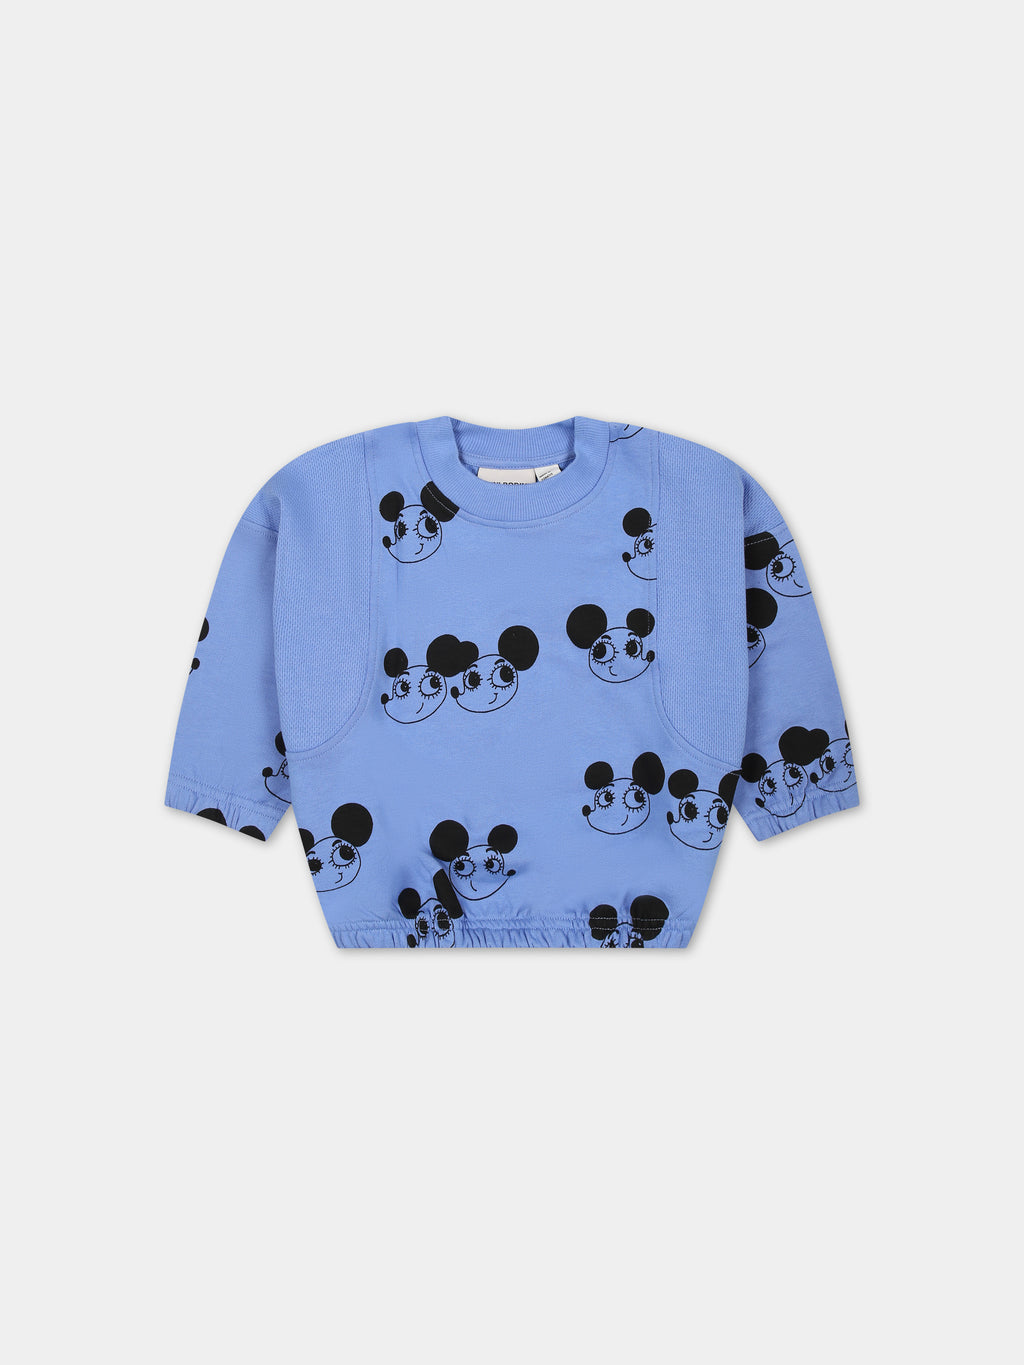 Light blue sweatshirt for baby boy with mice